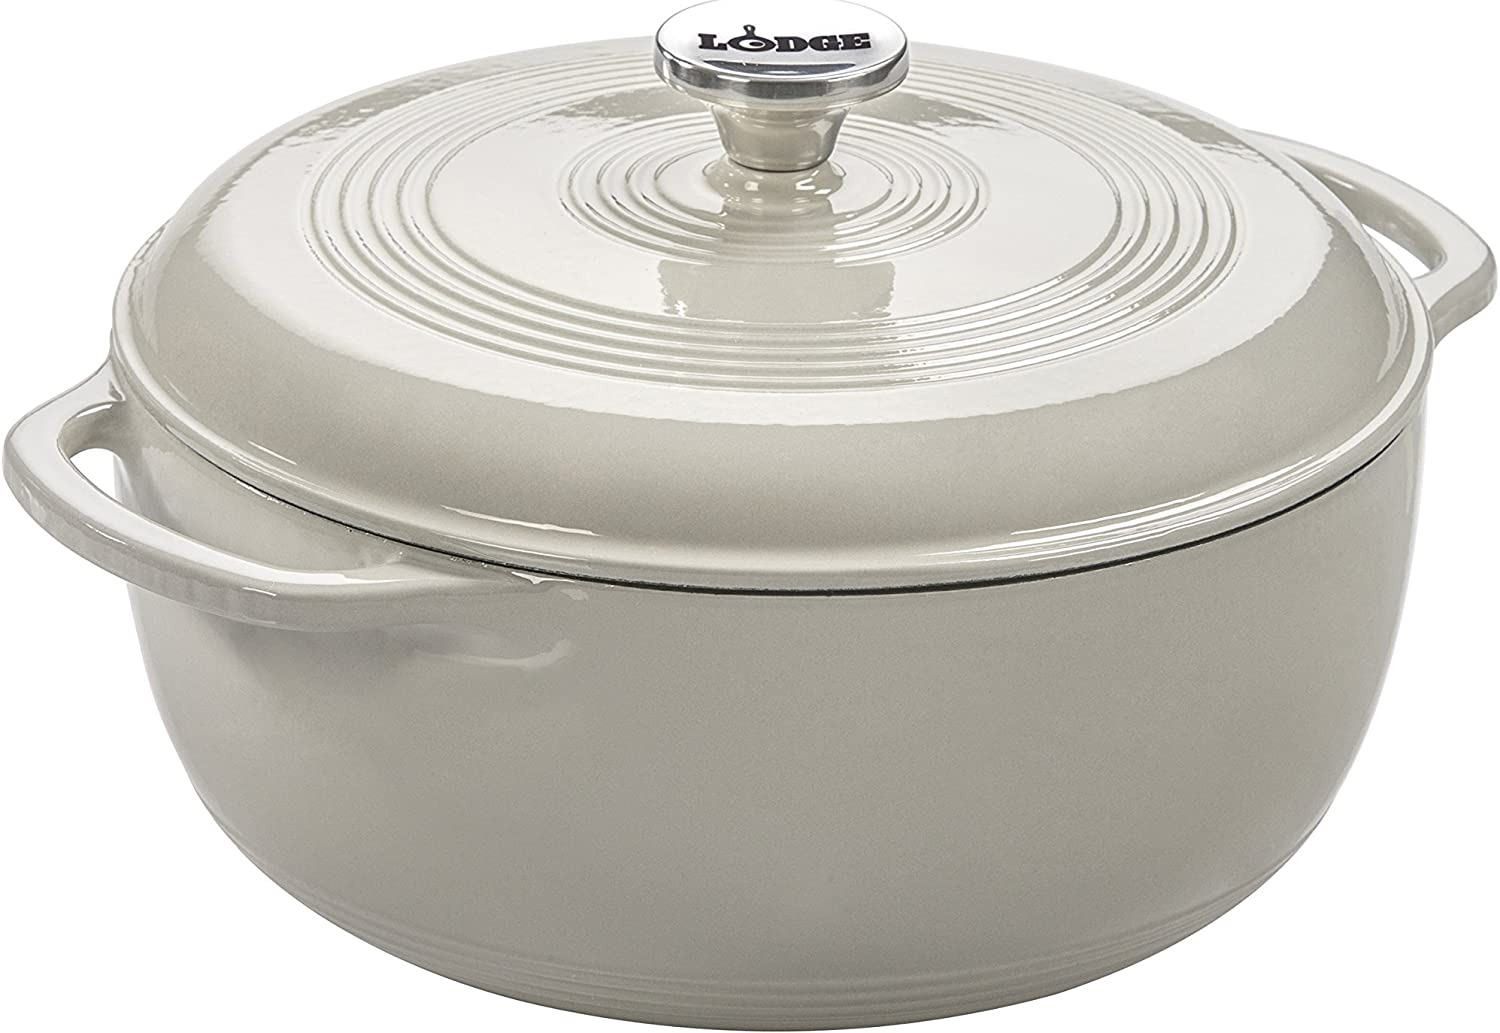 6 Quart Enameled Cast Iron Dutch Oven with Lid – Dual Handles – Oven Safe up to 